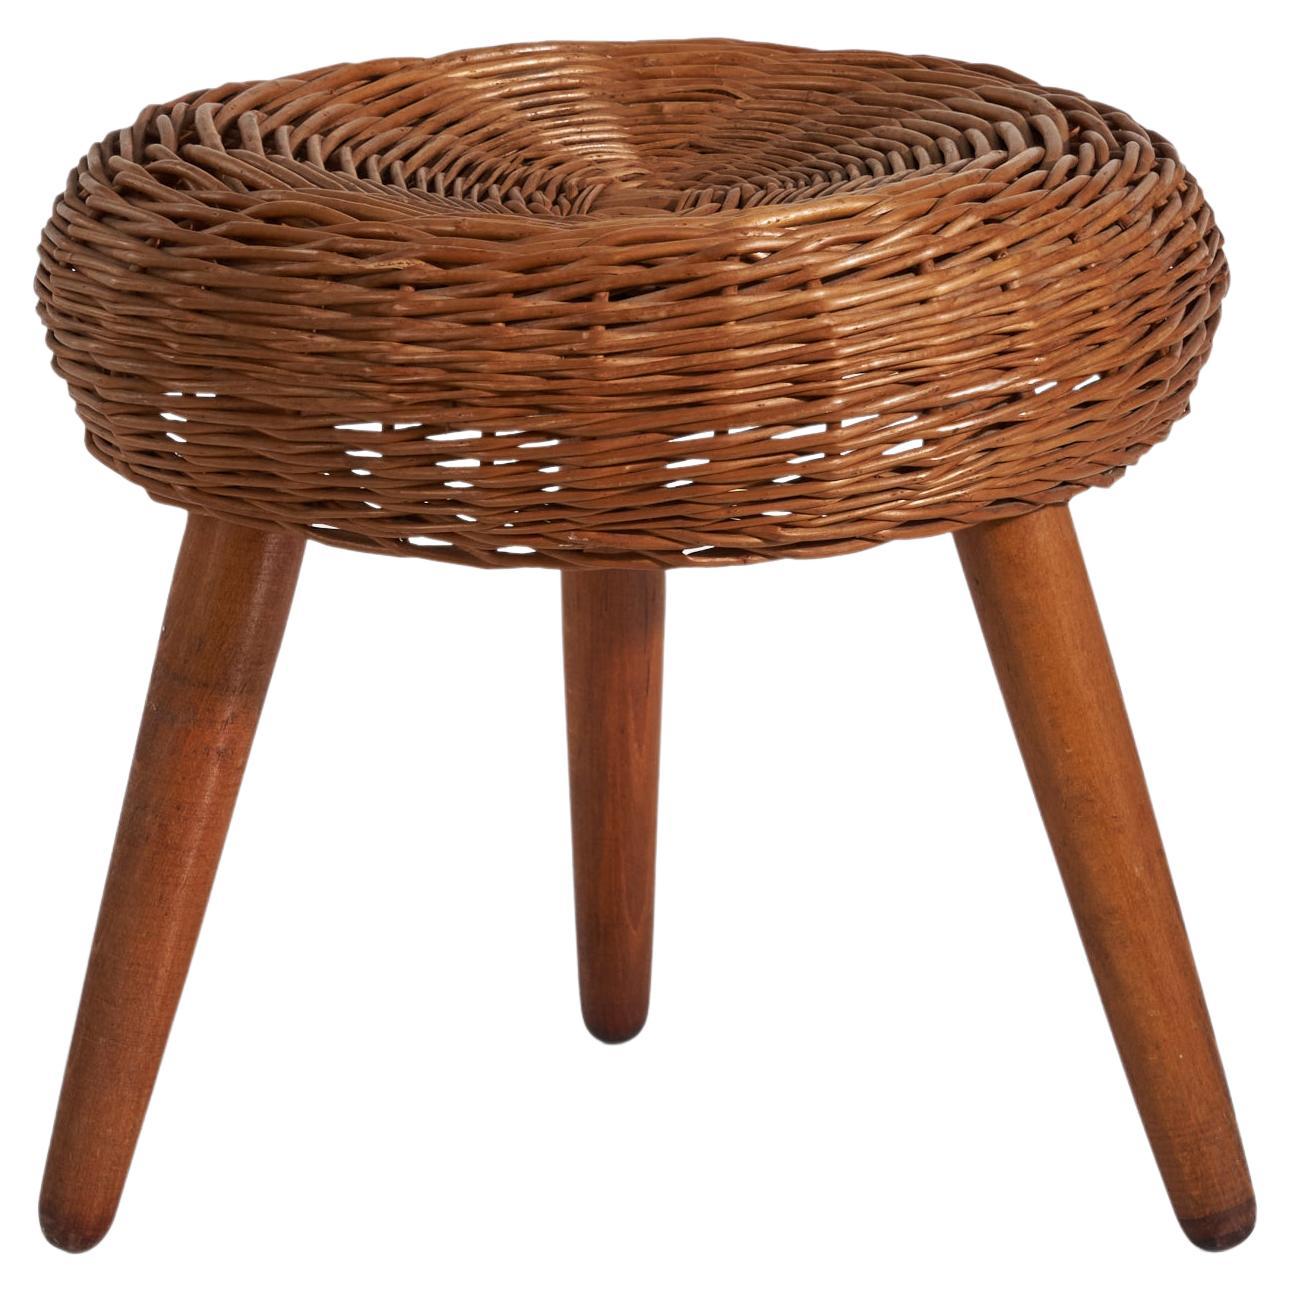 Tony Paul Attribution, Stool, Wicker, Wood, United States, 1950s For Sale